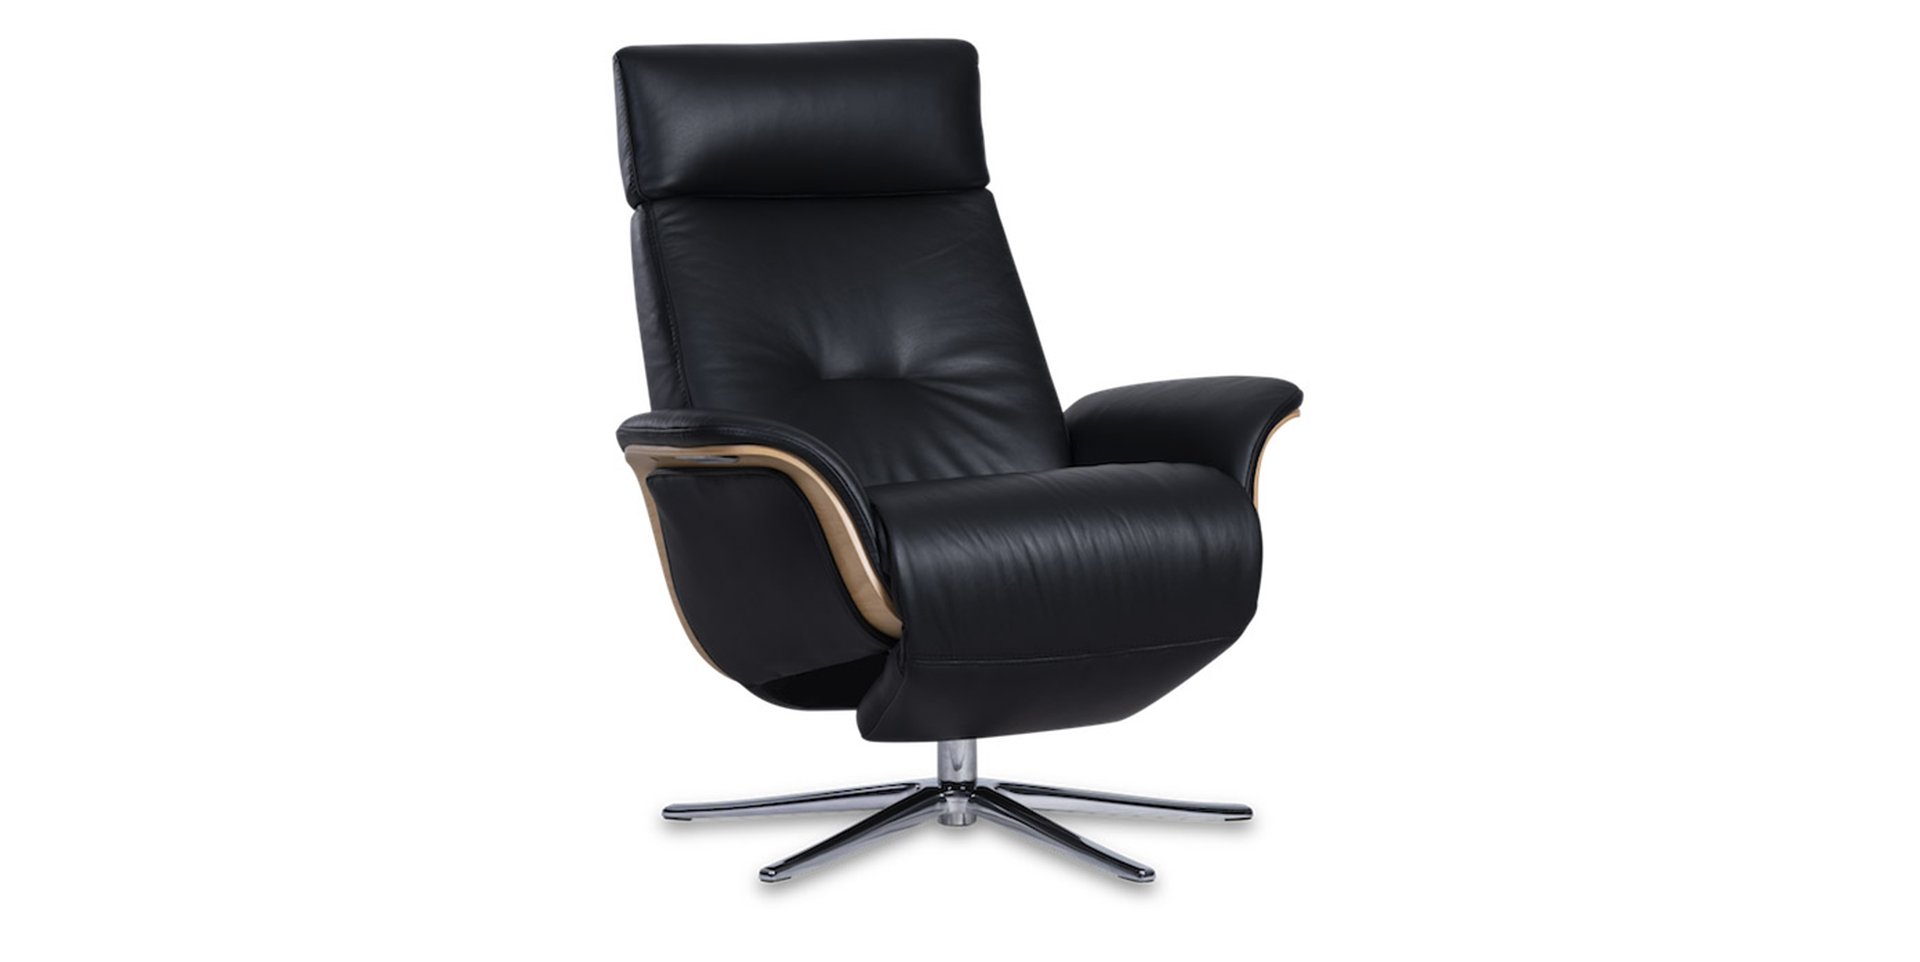 Slider Fauteuil relaxation SPACE 5000 POWER (image 3)